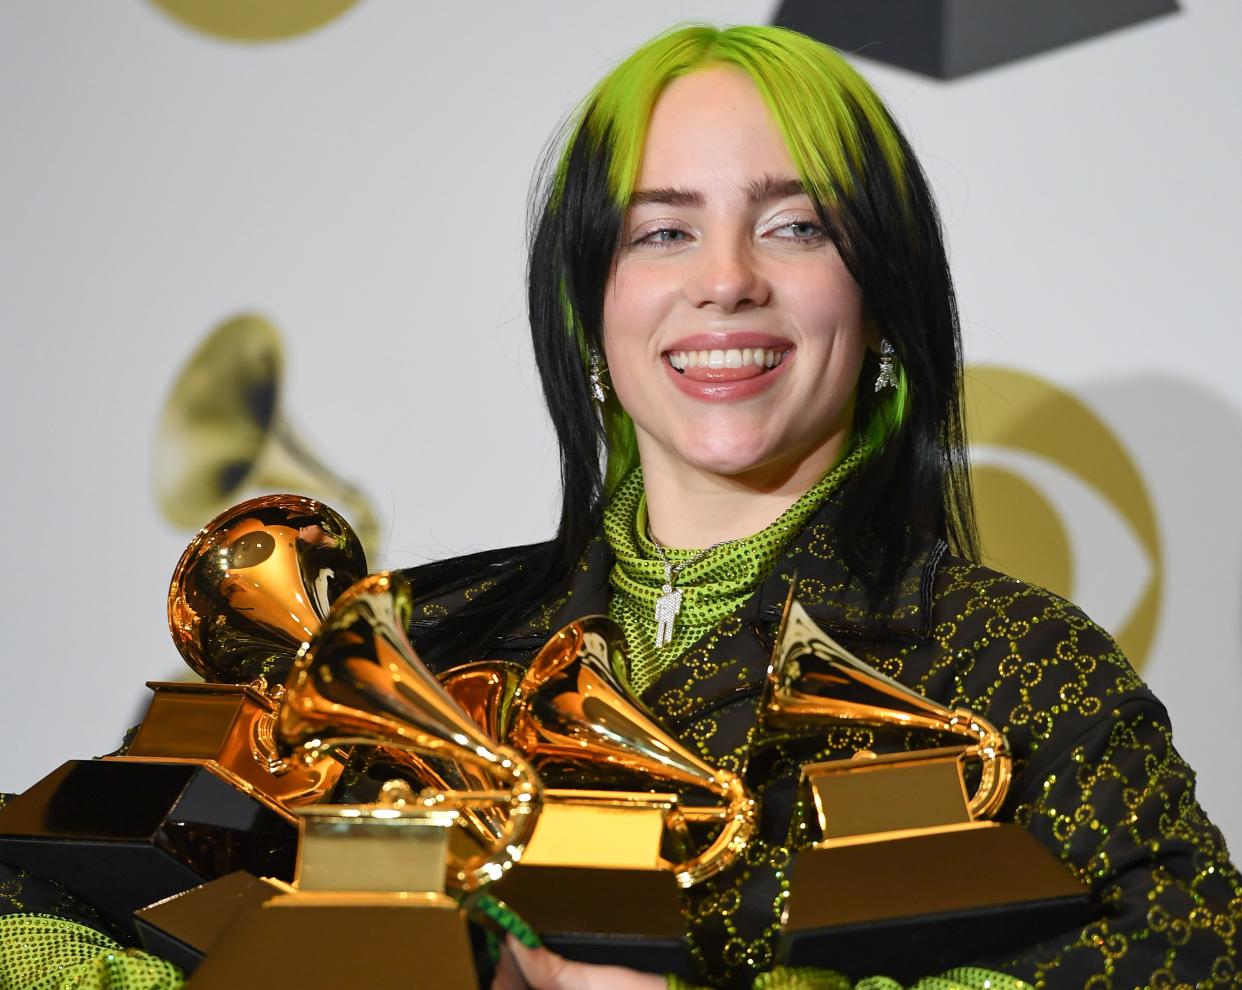 US singer-songwriter Billie Eilish poses in the press room with the awards for Album Of The Year, Record Of The Year, Best New Artist, Song Of The Year and Best Pop Vocal Album during the 62nd Annual Grammy Awards on January 26, 2020, in Los Angeles. (Photo by Frederic J. BROWN / AFP) (Photo by FREDERIC J. BROWN/AFP via Getty Images)